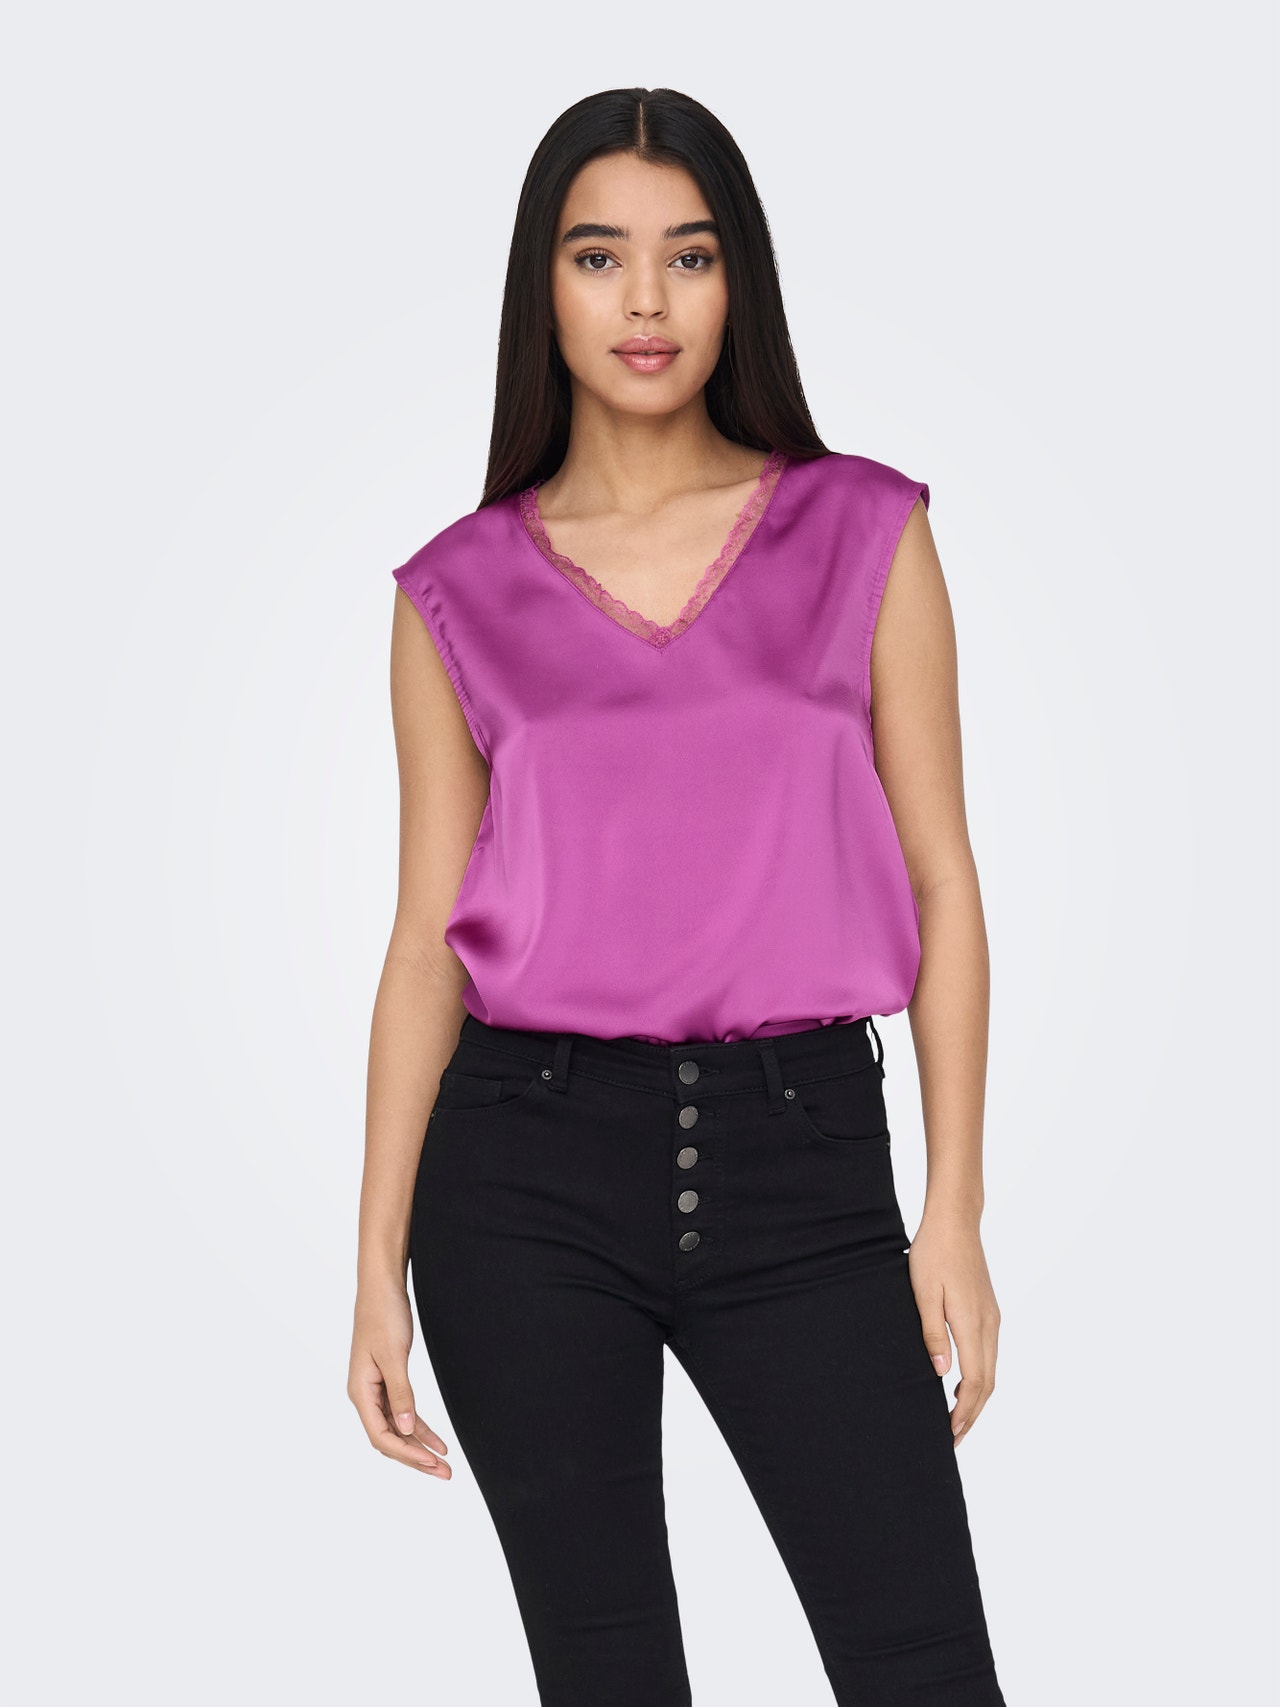 ONLY V-neck lace Sleeveless Top -Meadow Mauve - 15275016